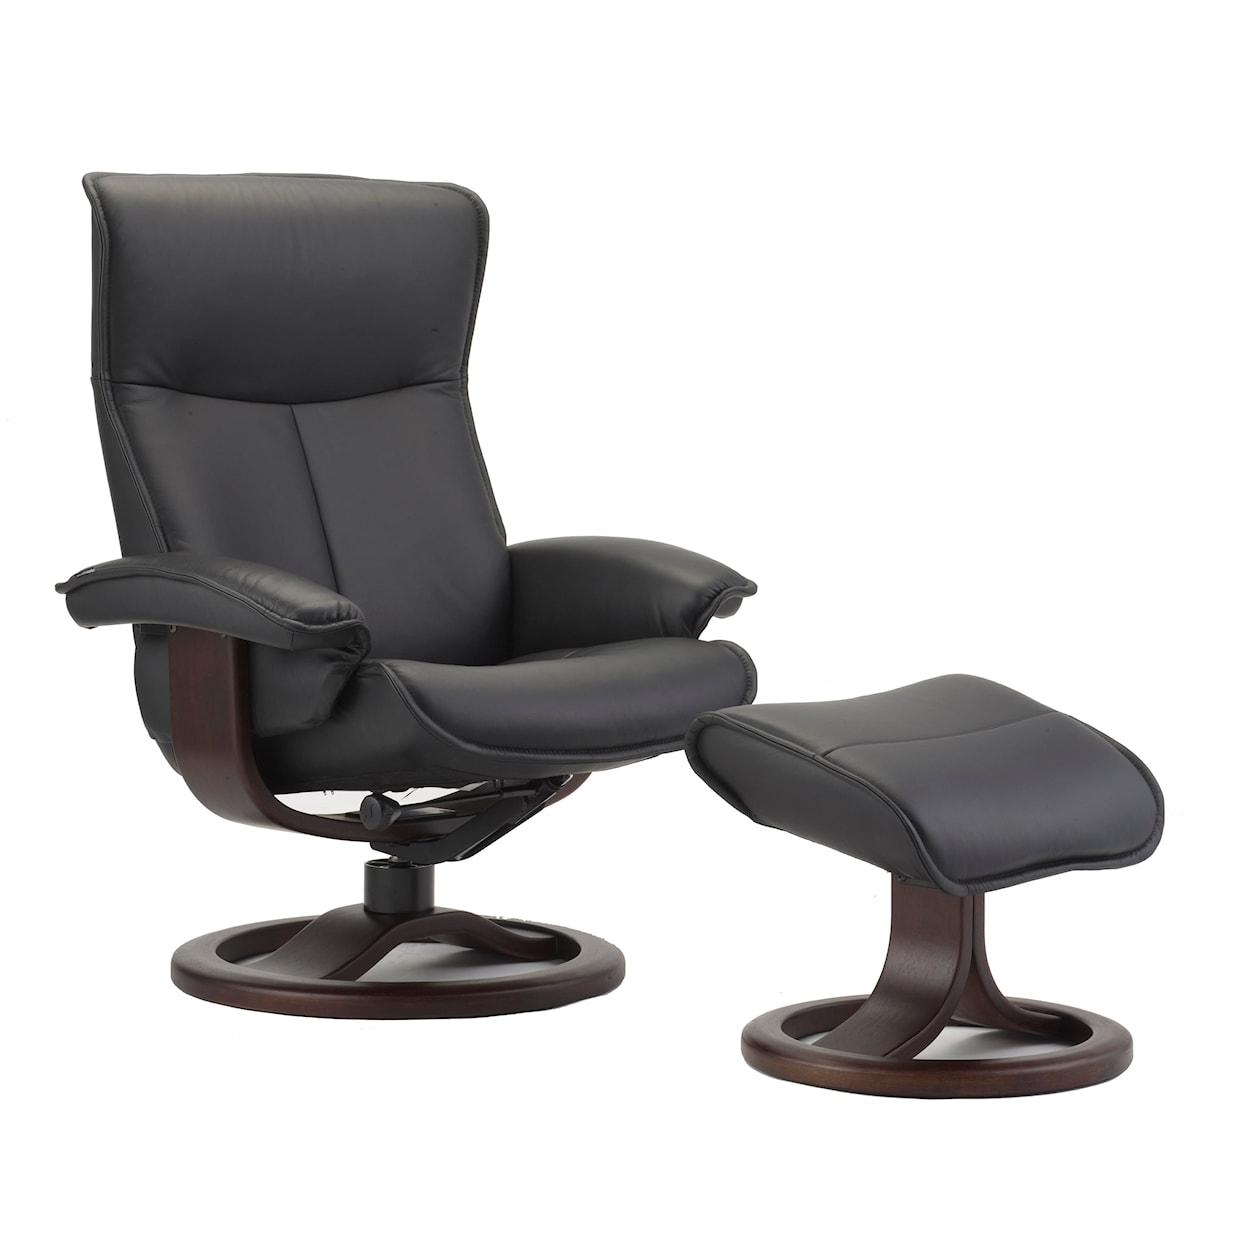 Fjords by Hjellegjerde Classic Comfort Collection Senator R Large Manual Recliner W/ Footstool